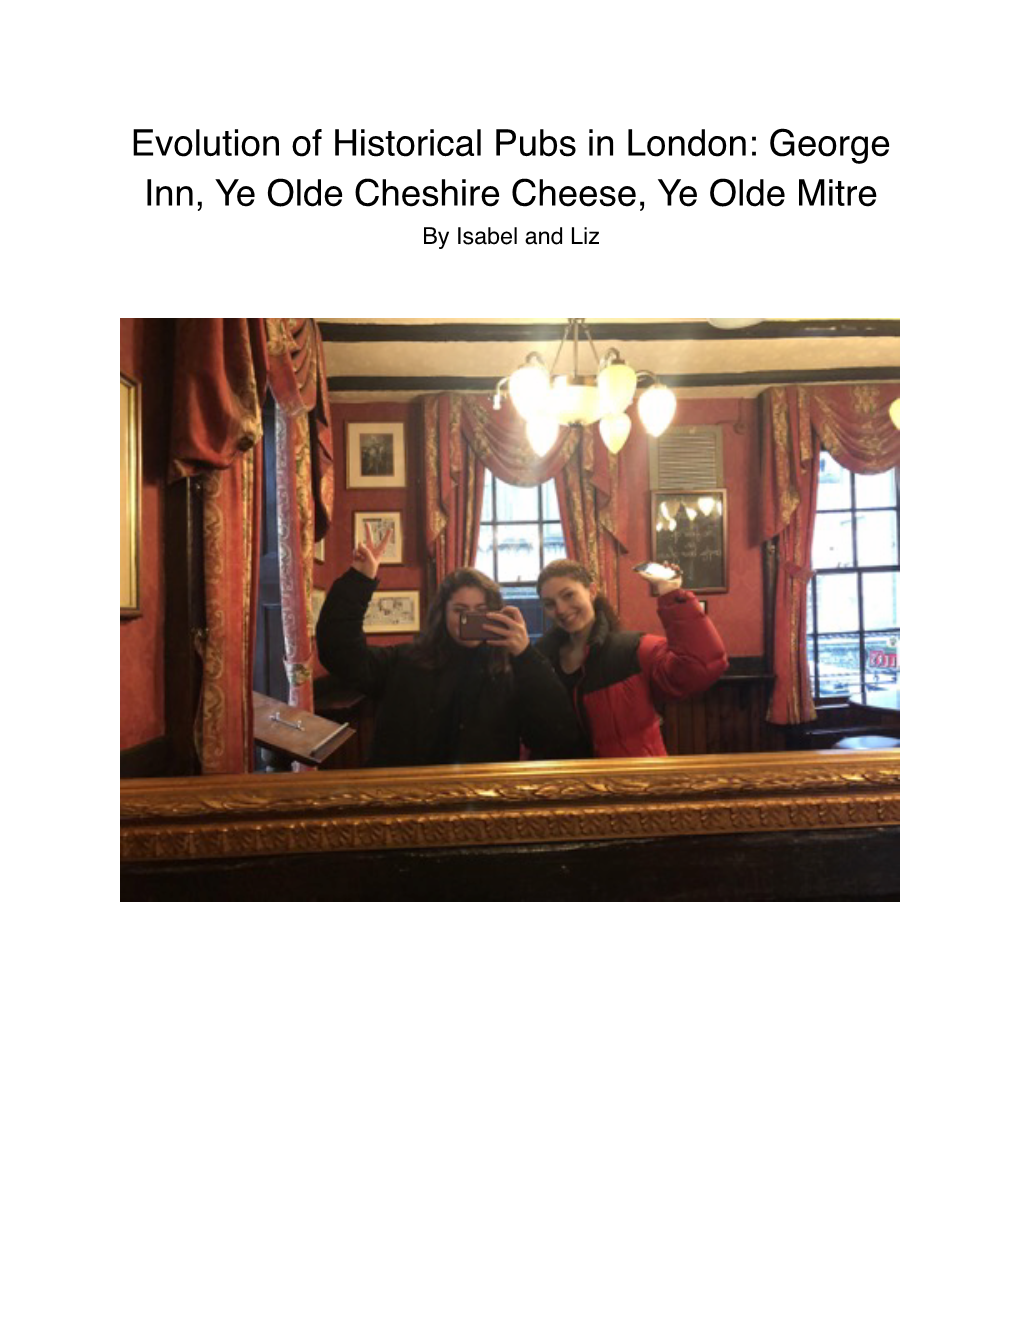 Evolution of Historical Pubs in London: George Inn, Ye Olde Cheshire Cheese, Ye Olde Mitre by Isabel and Liz